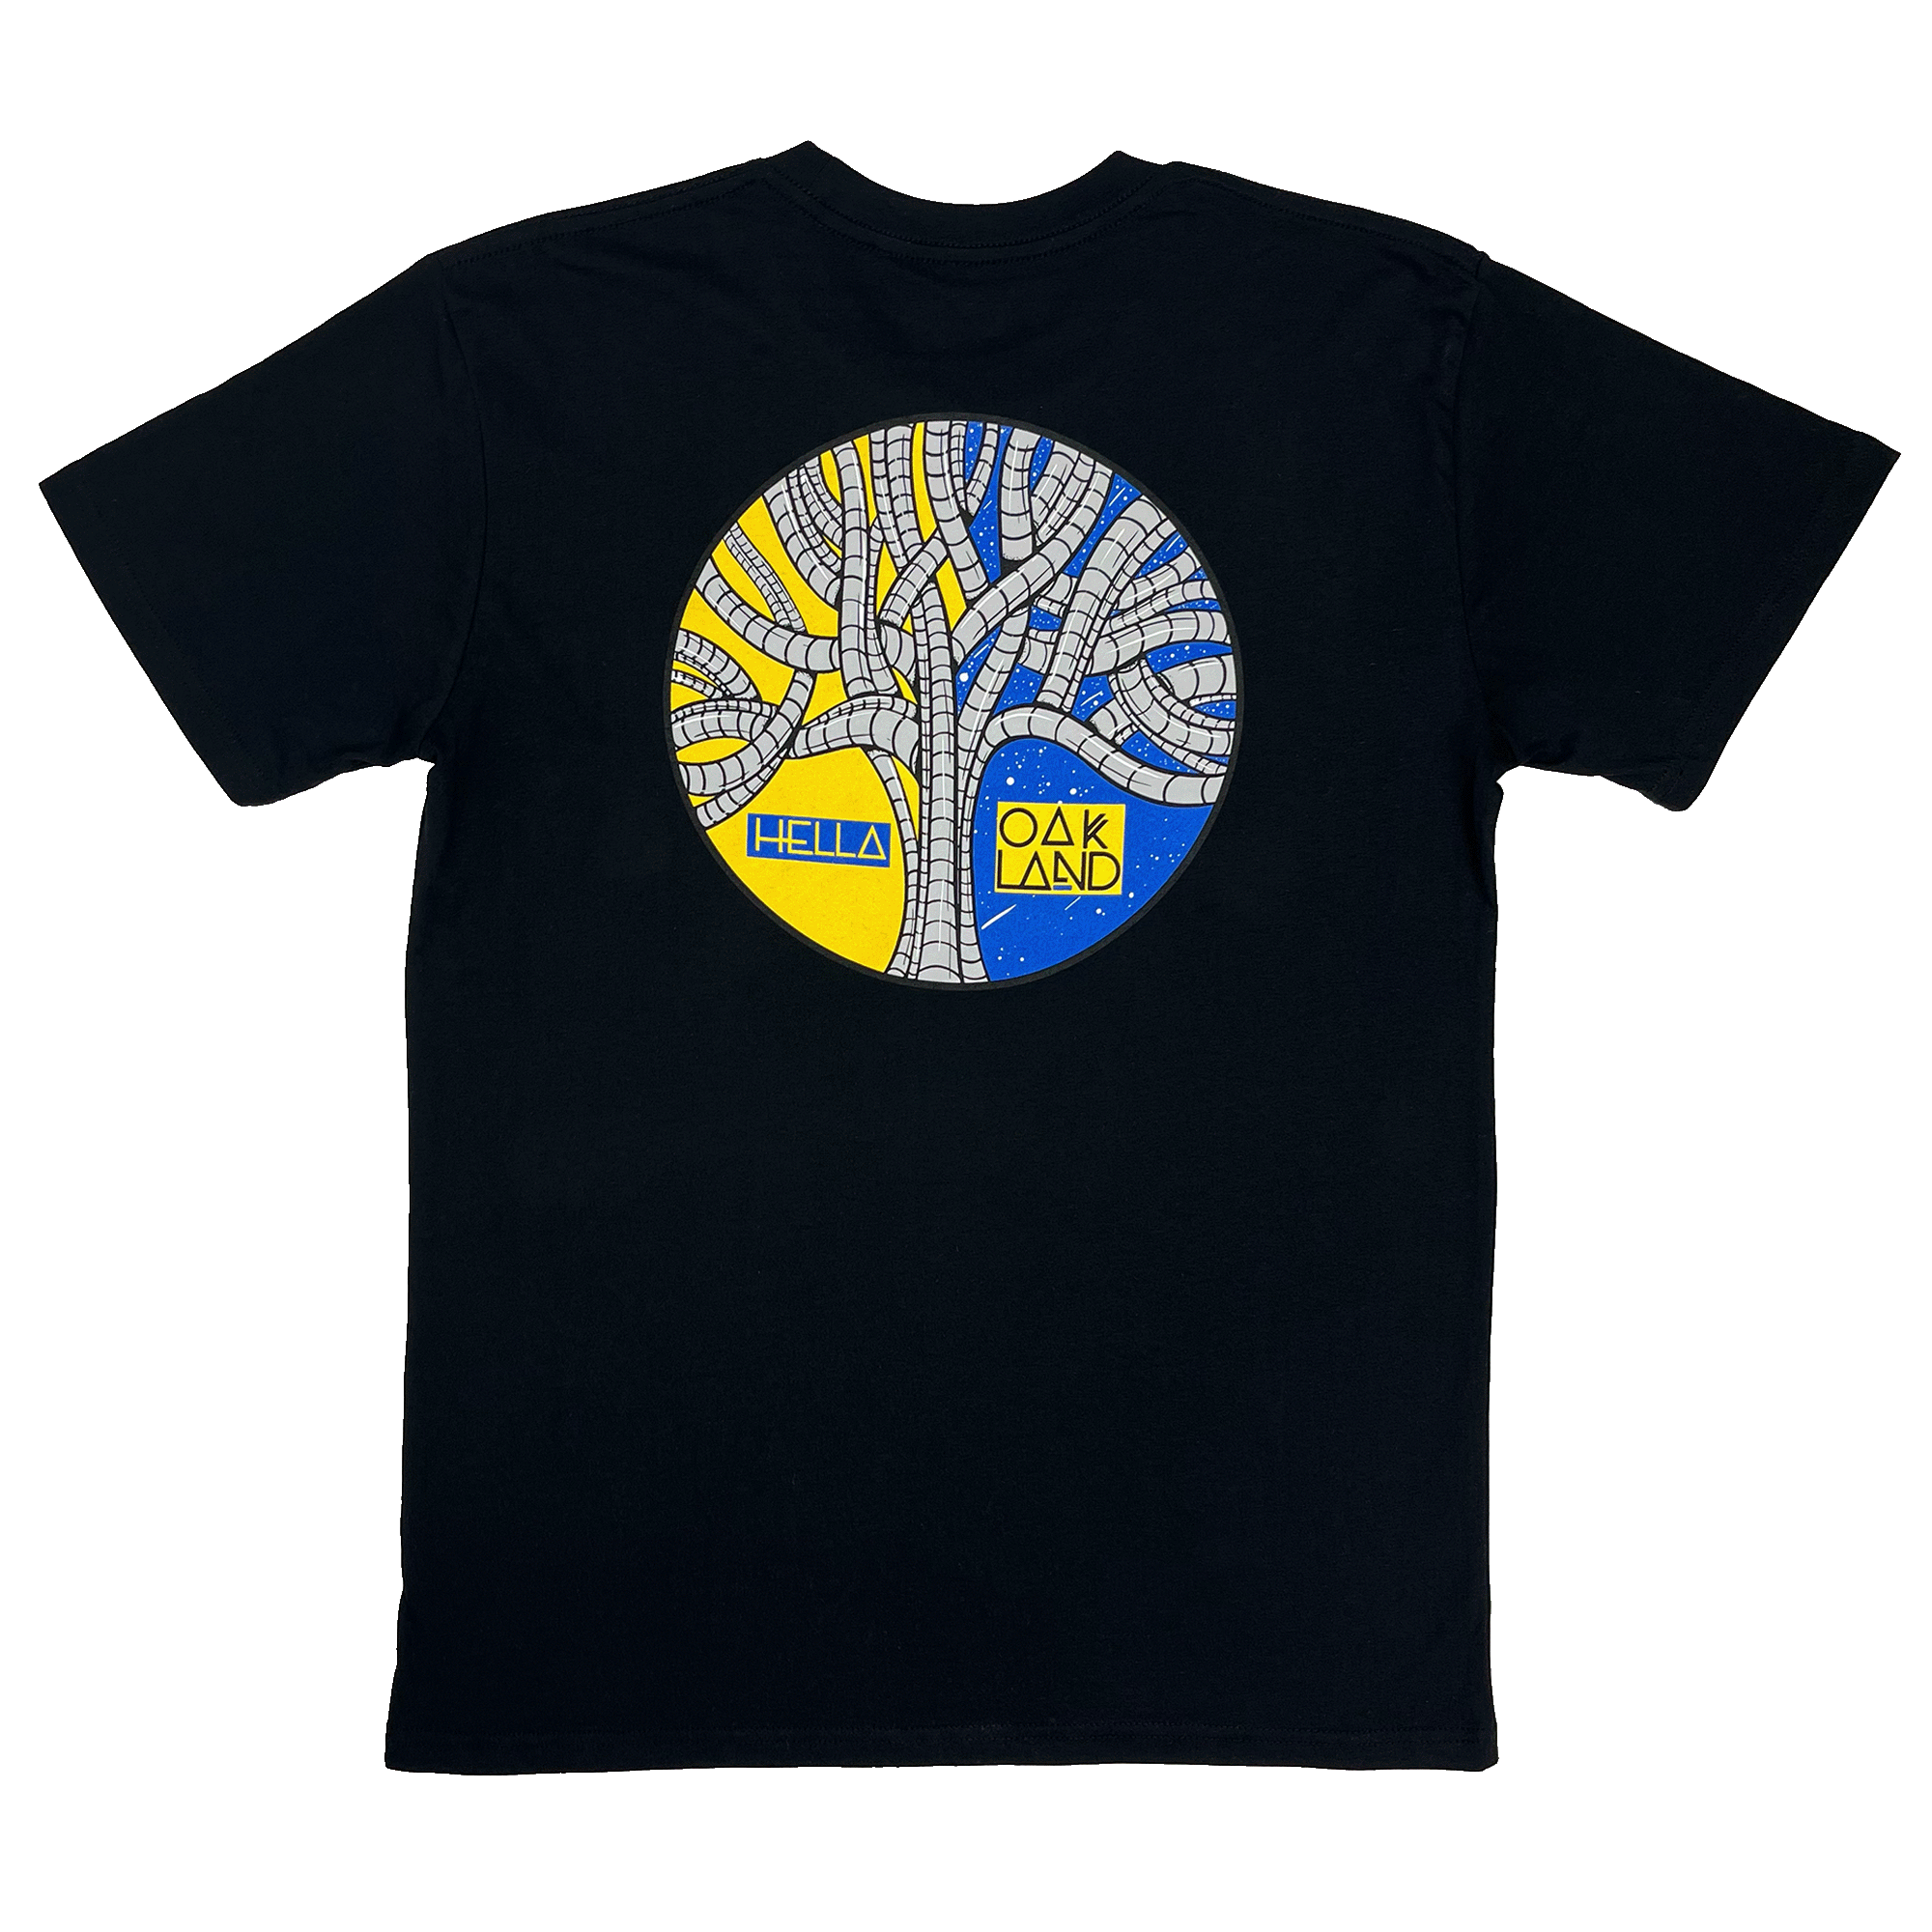 Black cotton T-shirt with a large blue, yellow, and grey HELLA OAKLAND circular tree graphic by artist HellaFutures.